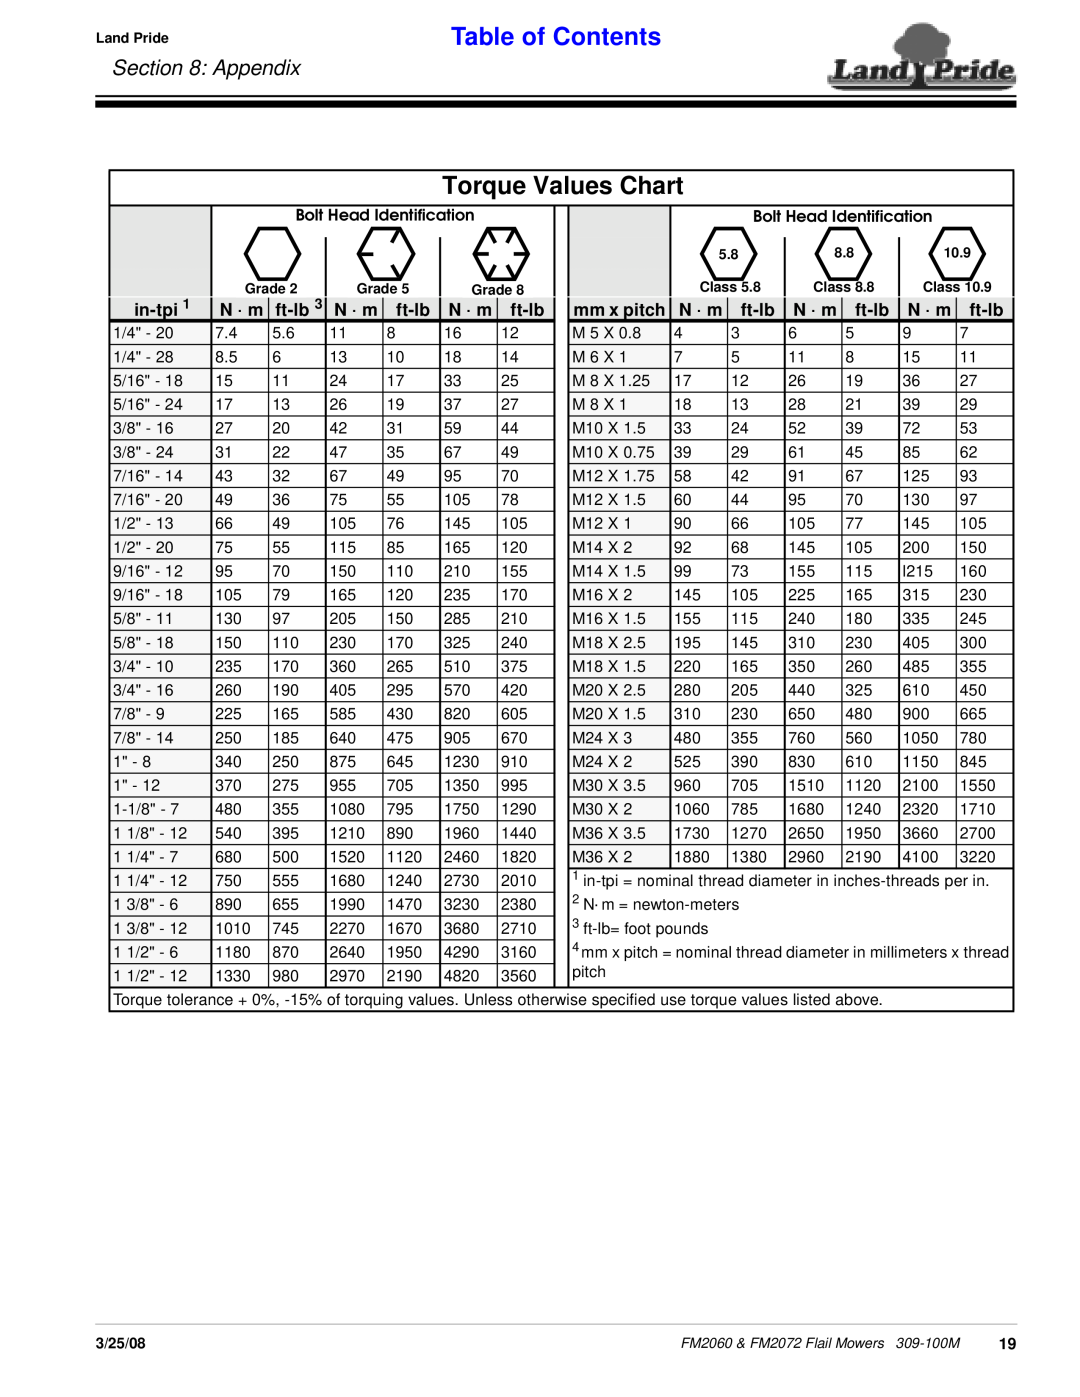 Land Pride 309-100M manual Torque Values Chart, Appendix, Table of Contents, in-tpi, N · m, ft-lb, mm x pitch 